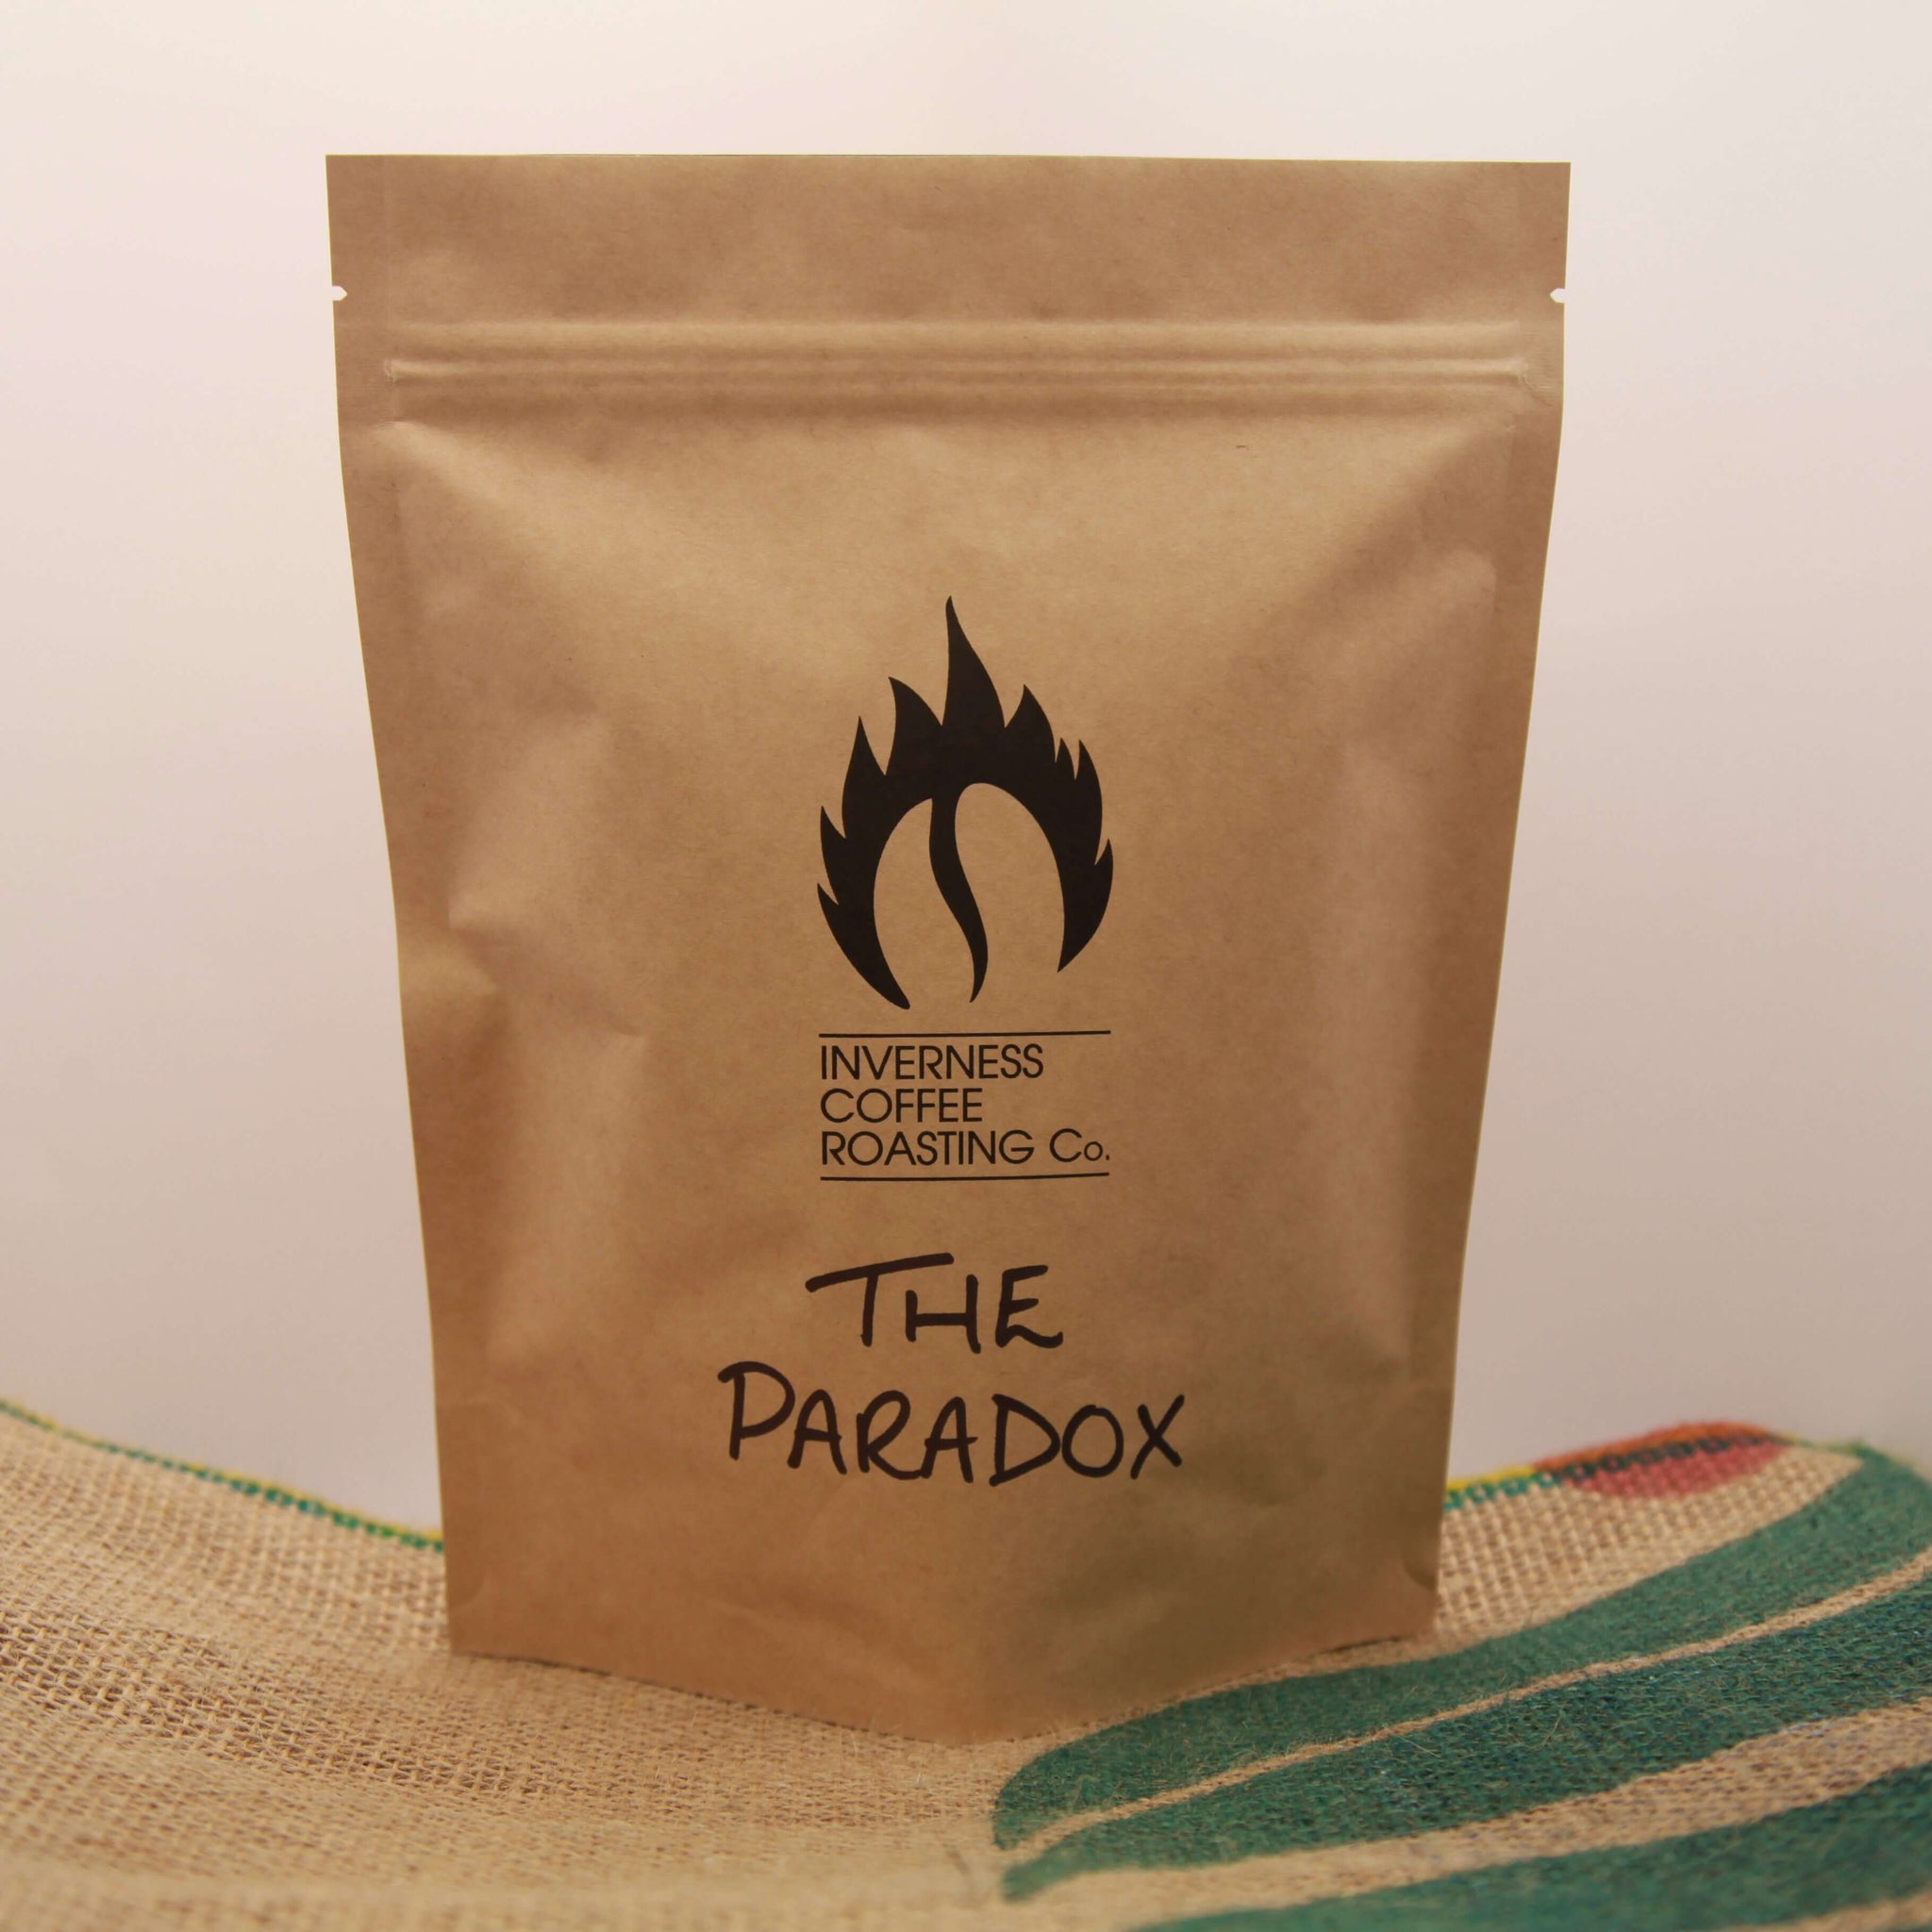 The Paradox Blend